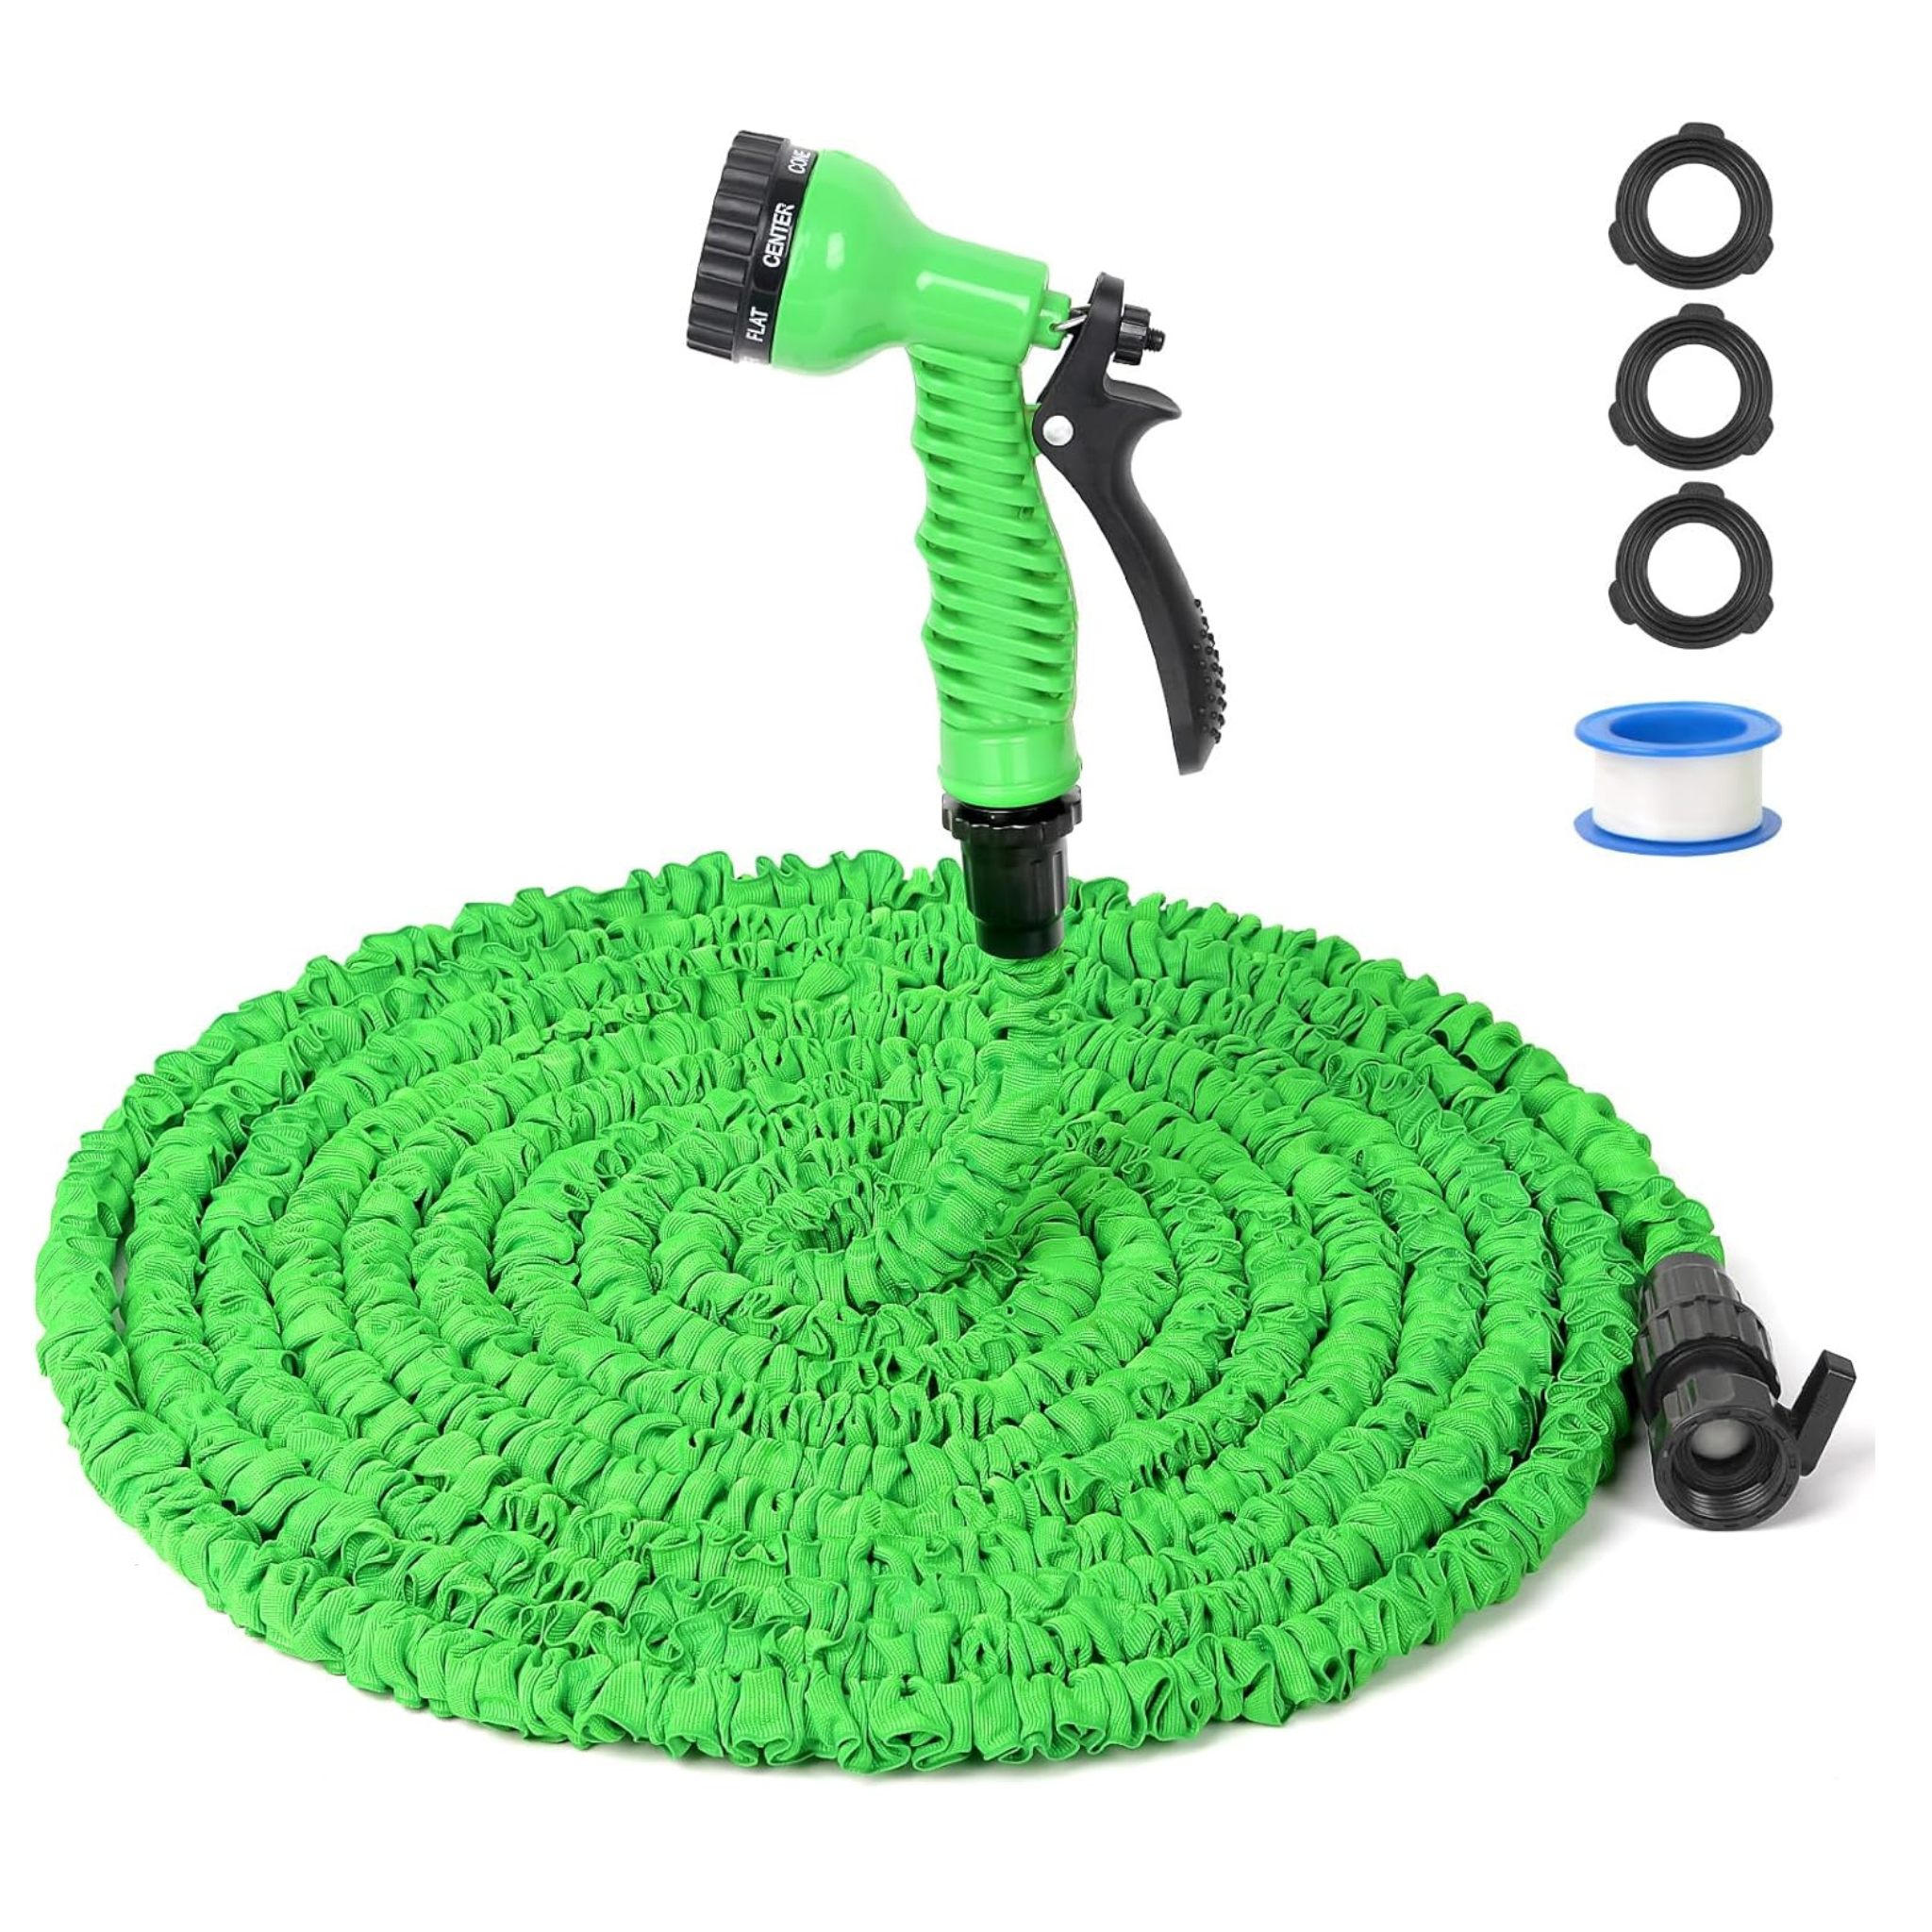 50FT Flexible Water Hose with Spray Nozzle